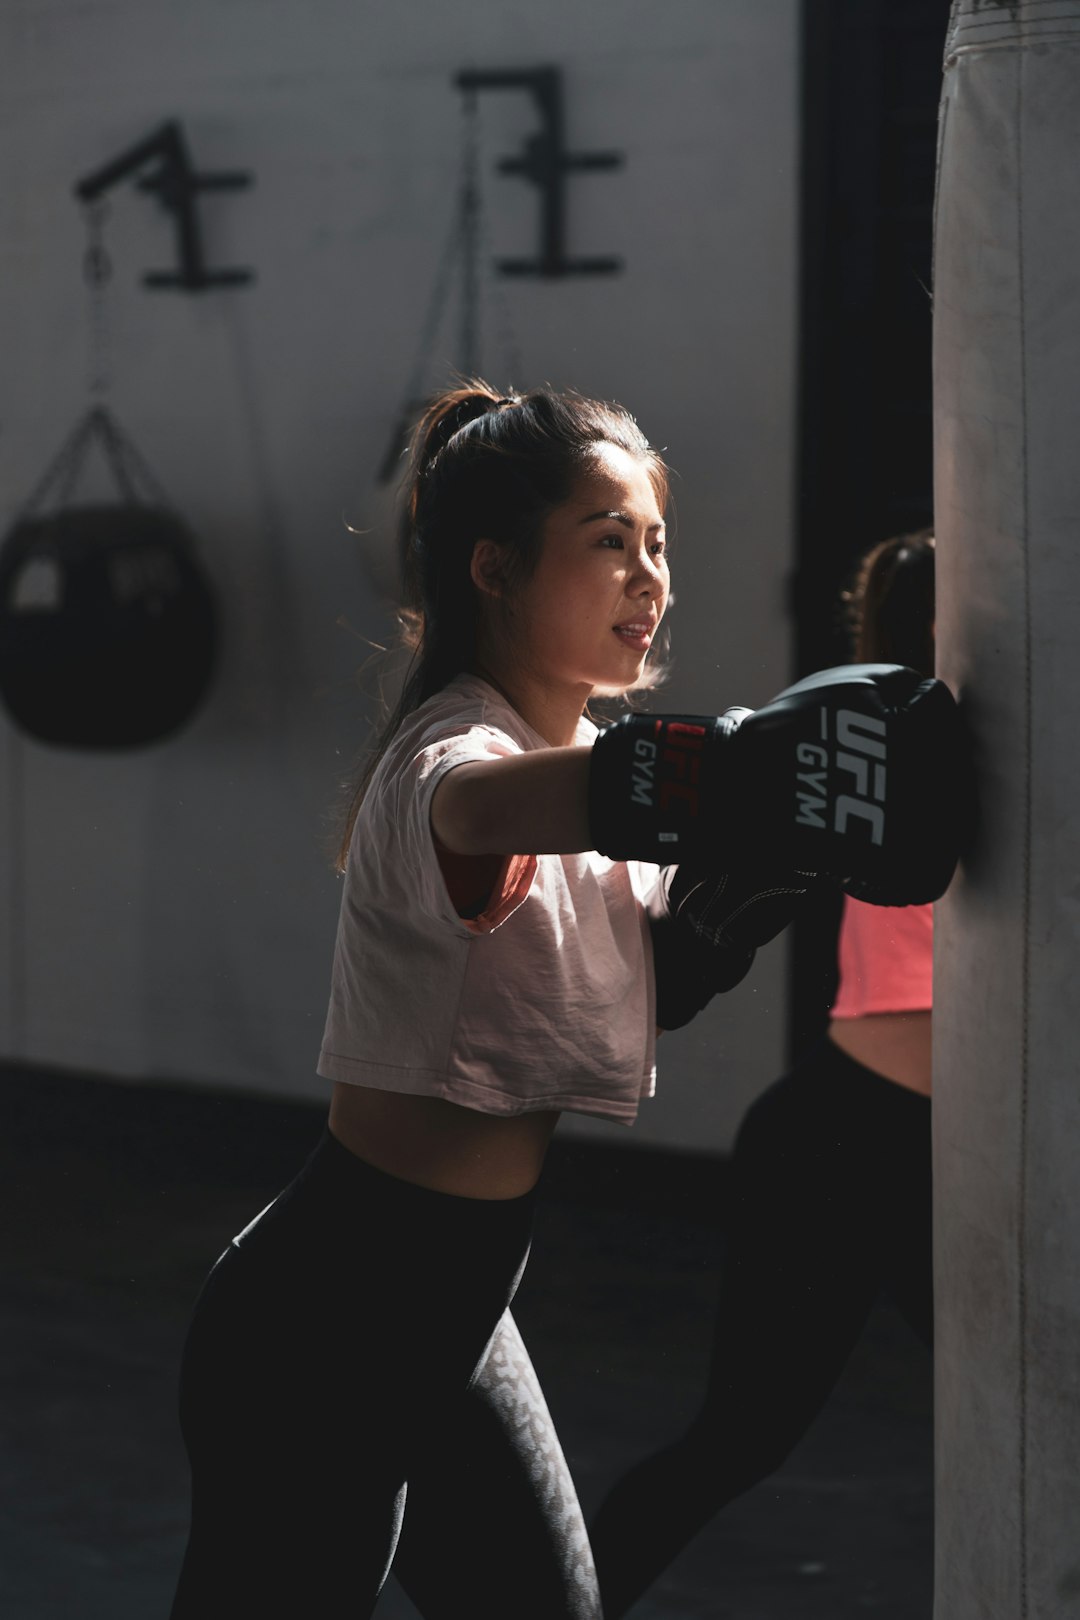 boxing cognitive function improves 